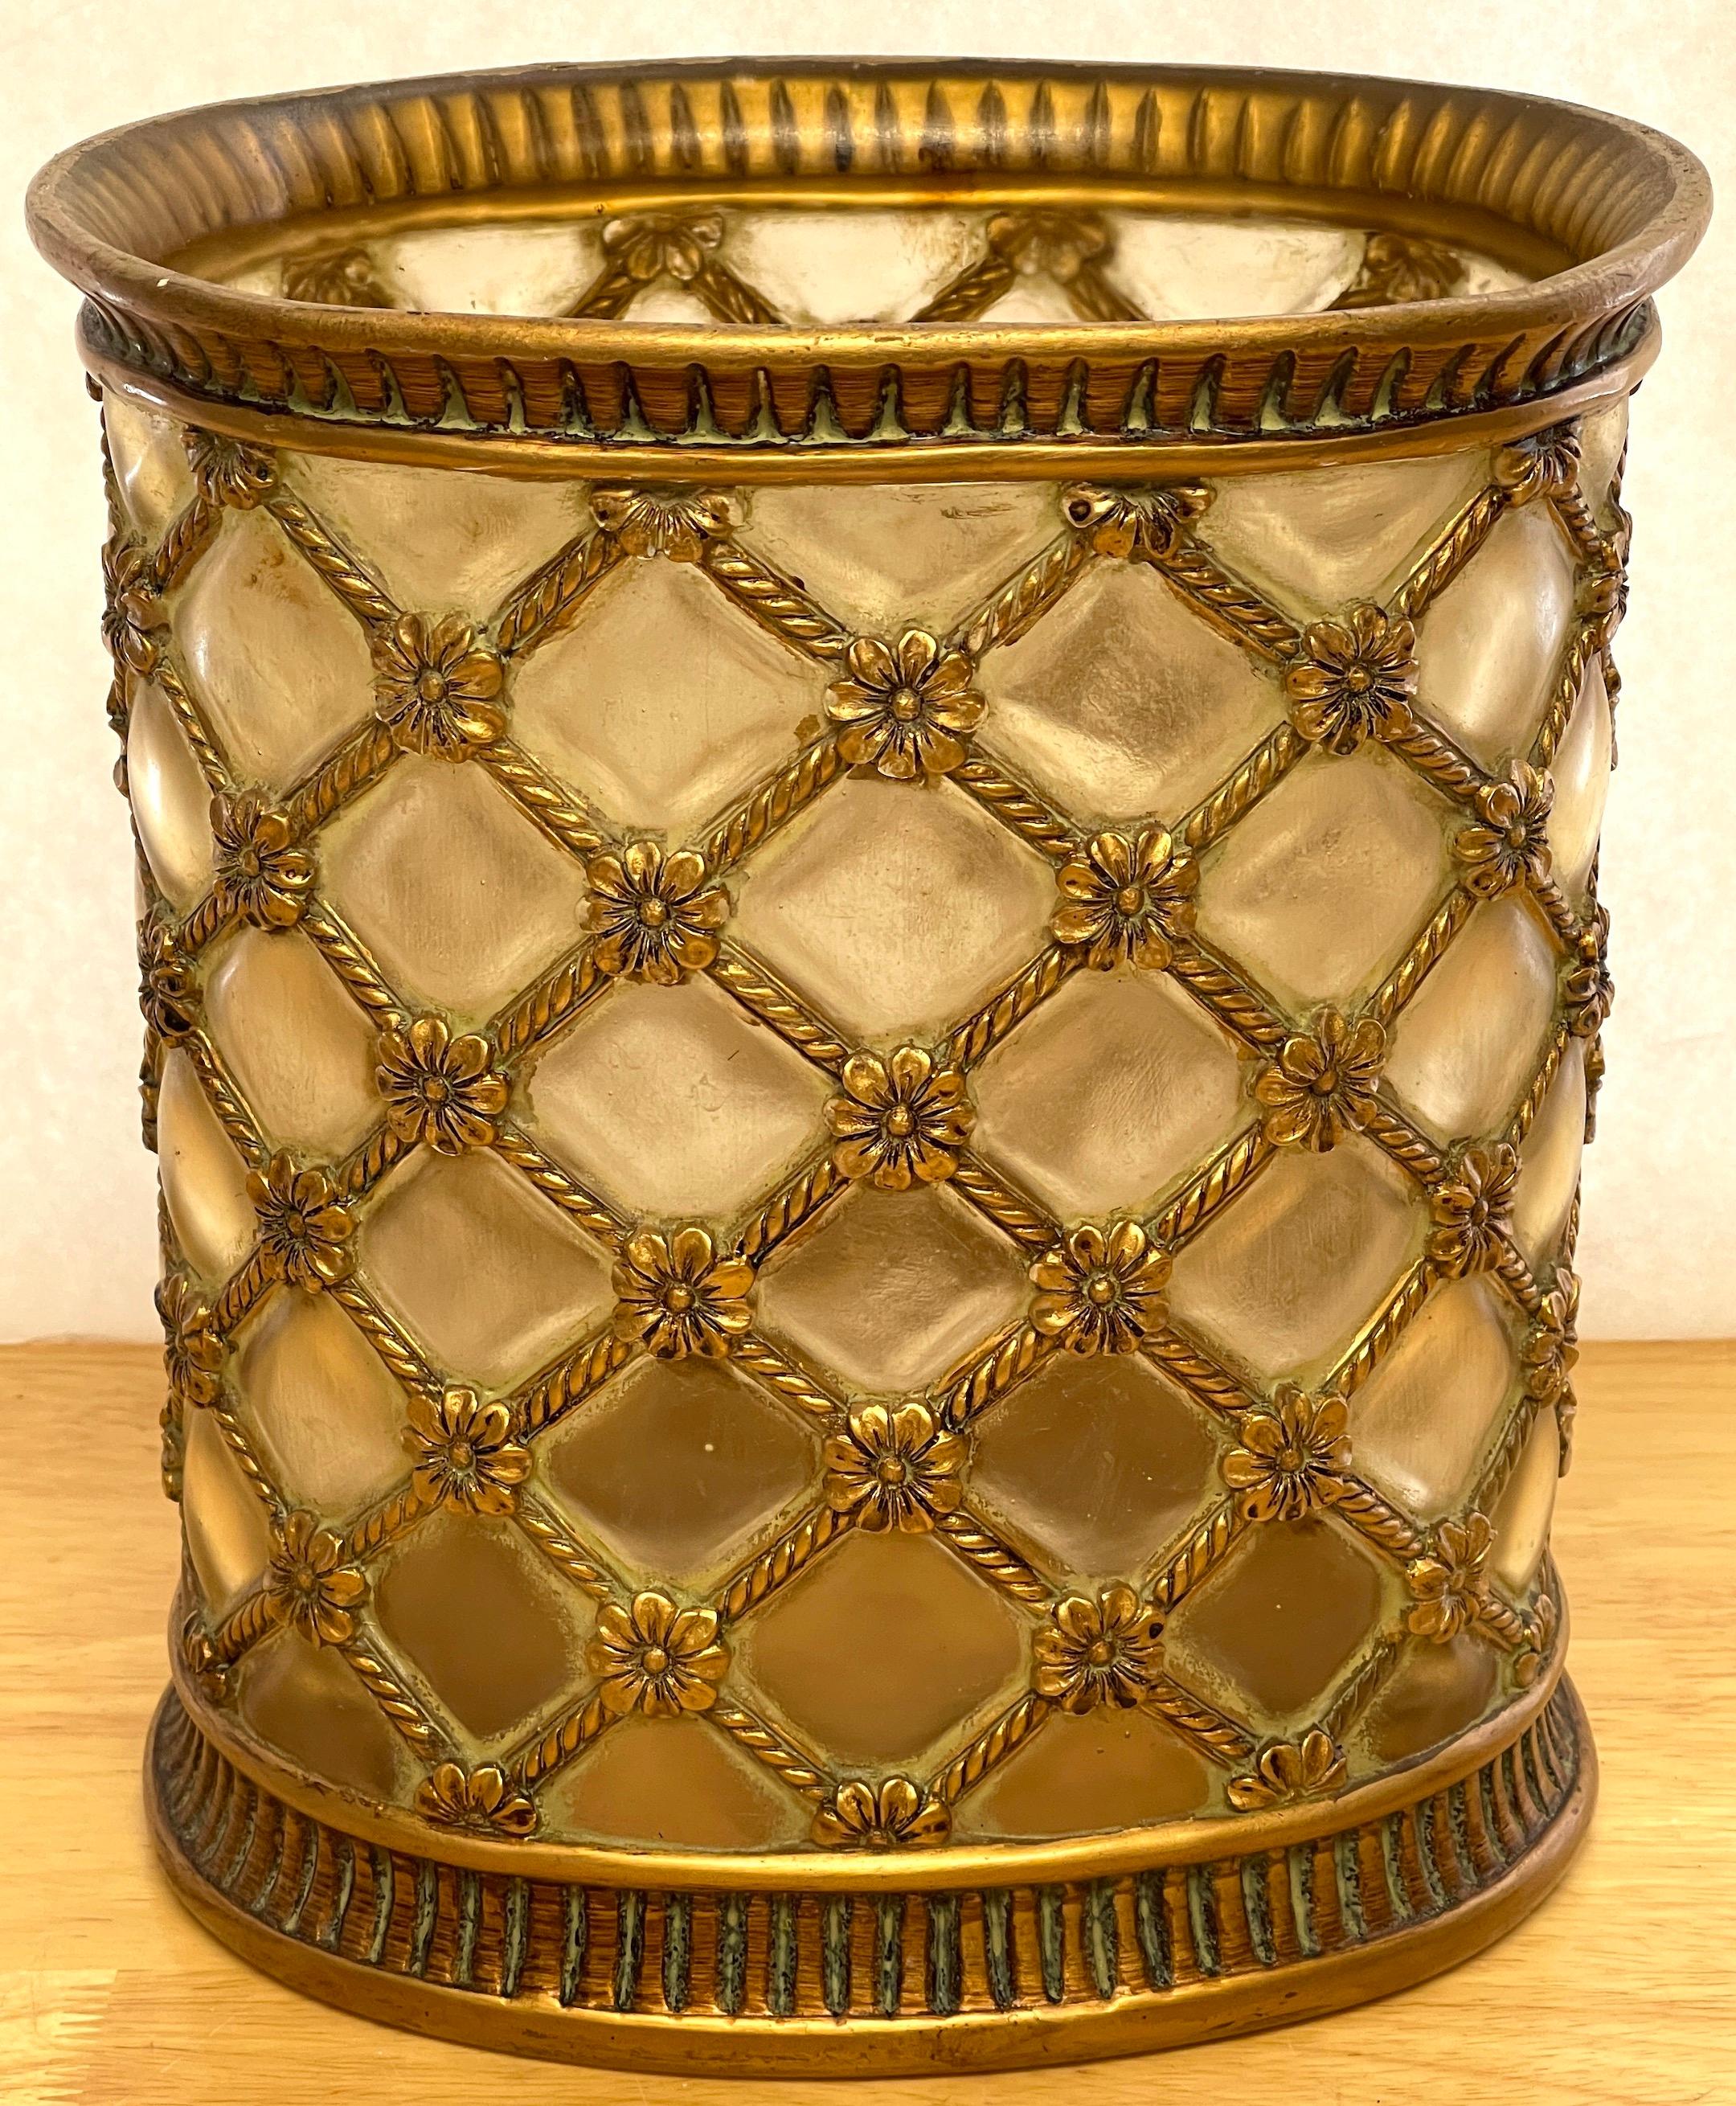 Hollywood Regency gilt & frosted lucite wastepaper basket/ trash can
A unique glamorous wastepaper basket/ trash can, of oval form with a gilt reeded top, the middle with continuous 'blown-out' / convex frosted /'cushions', joined by gilt woven